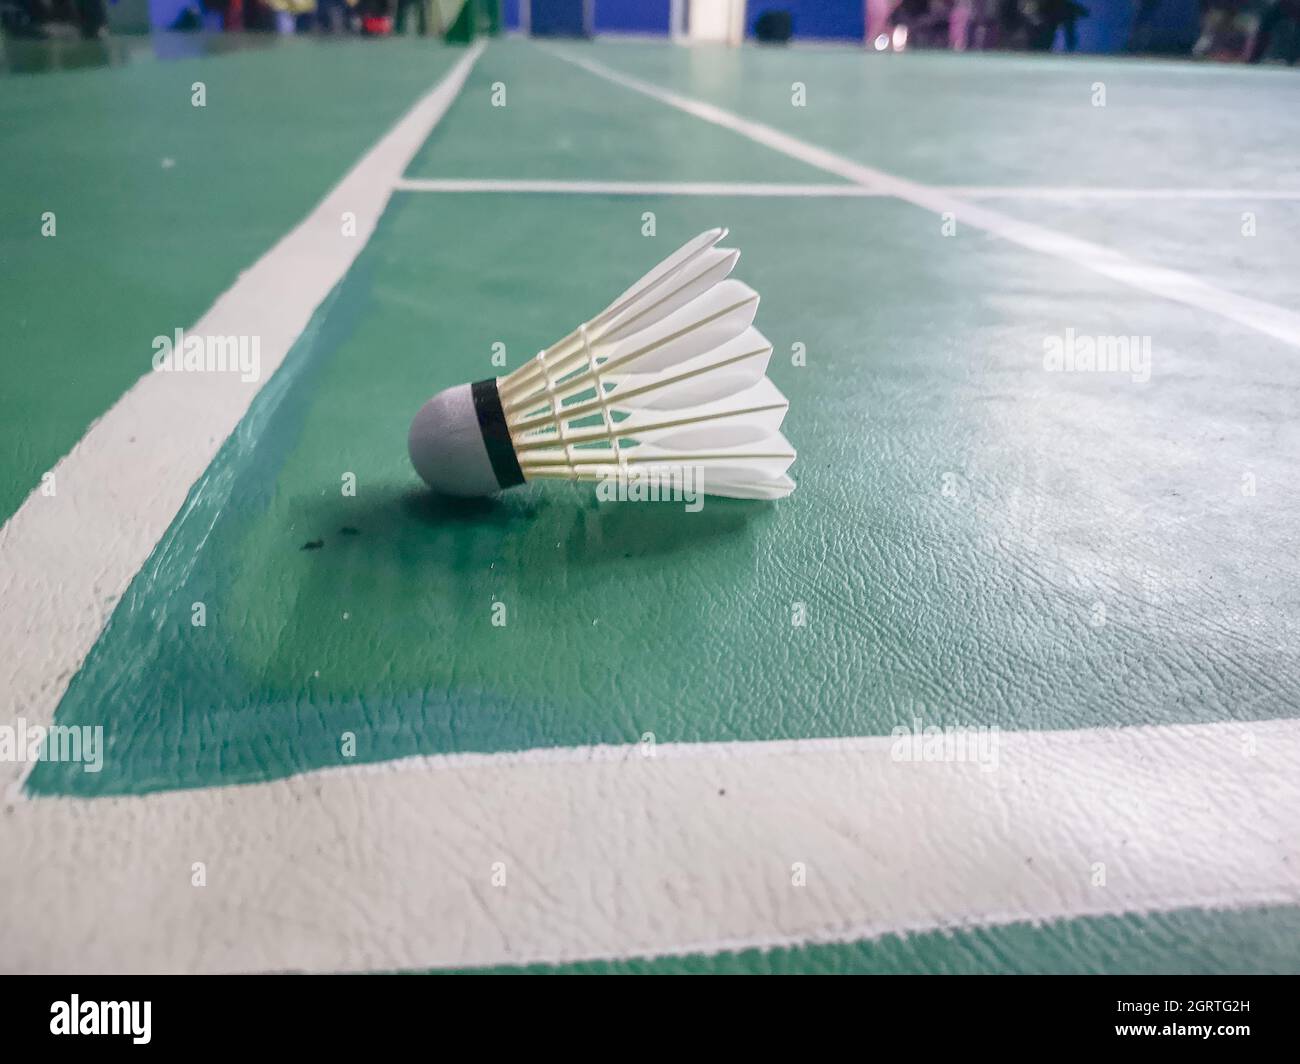 Close Up Details Of The Shutter Cock At Indoor Badminton Court Stock Photo  - Alamy